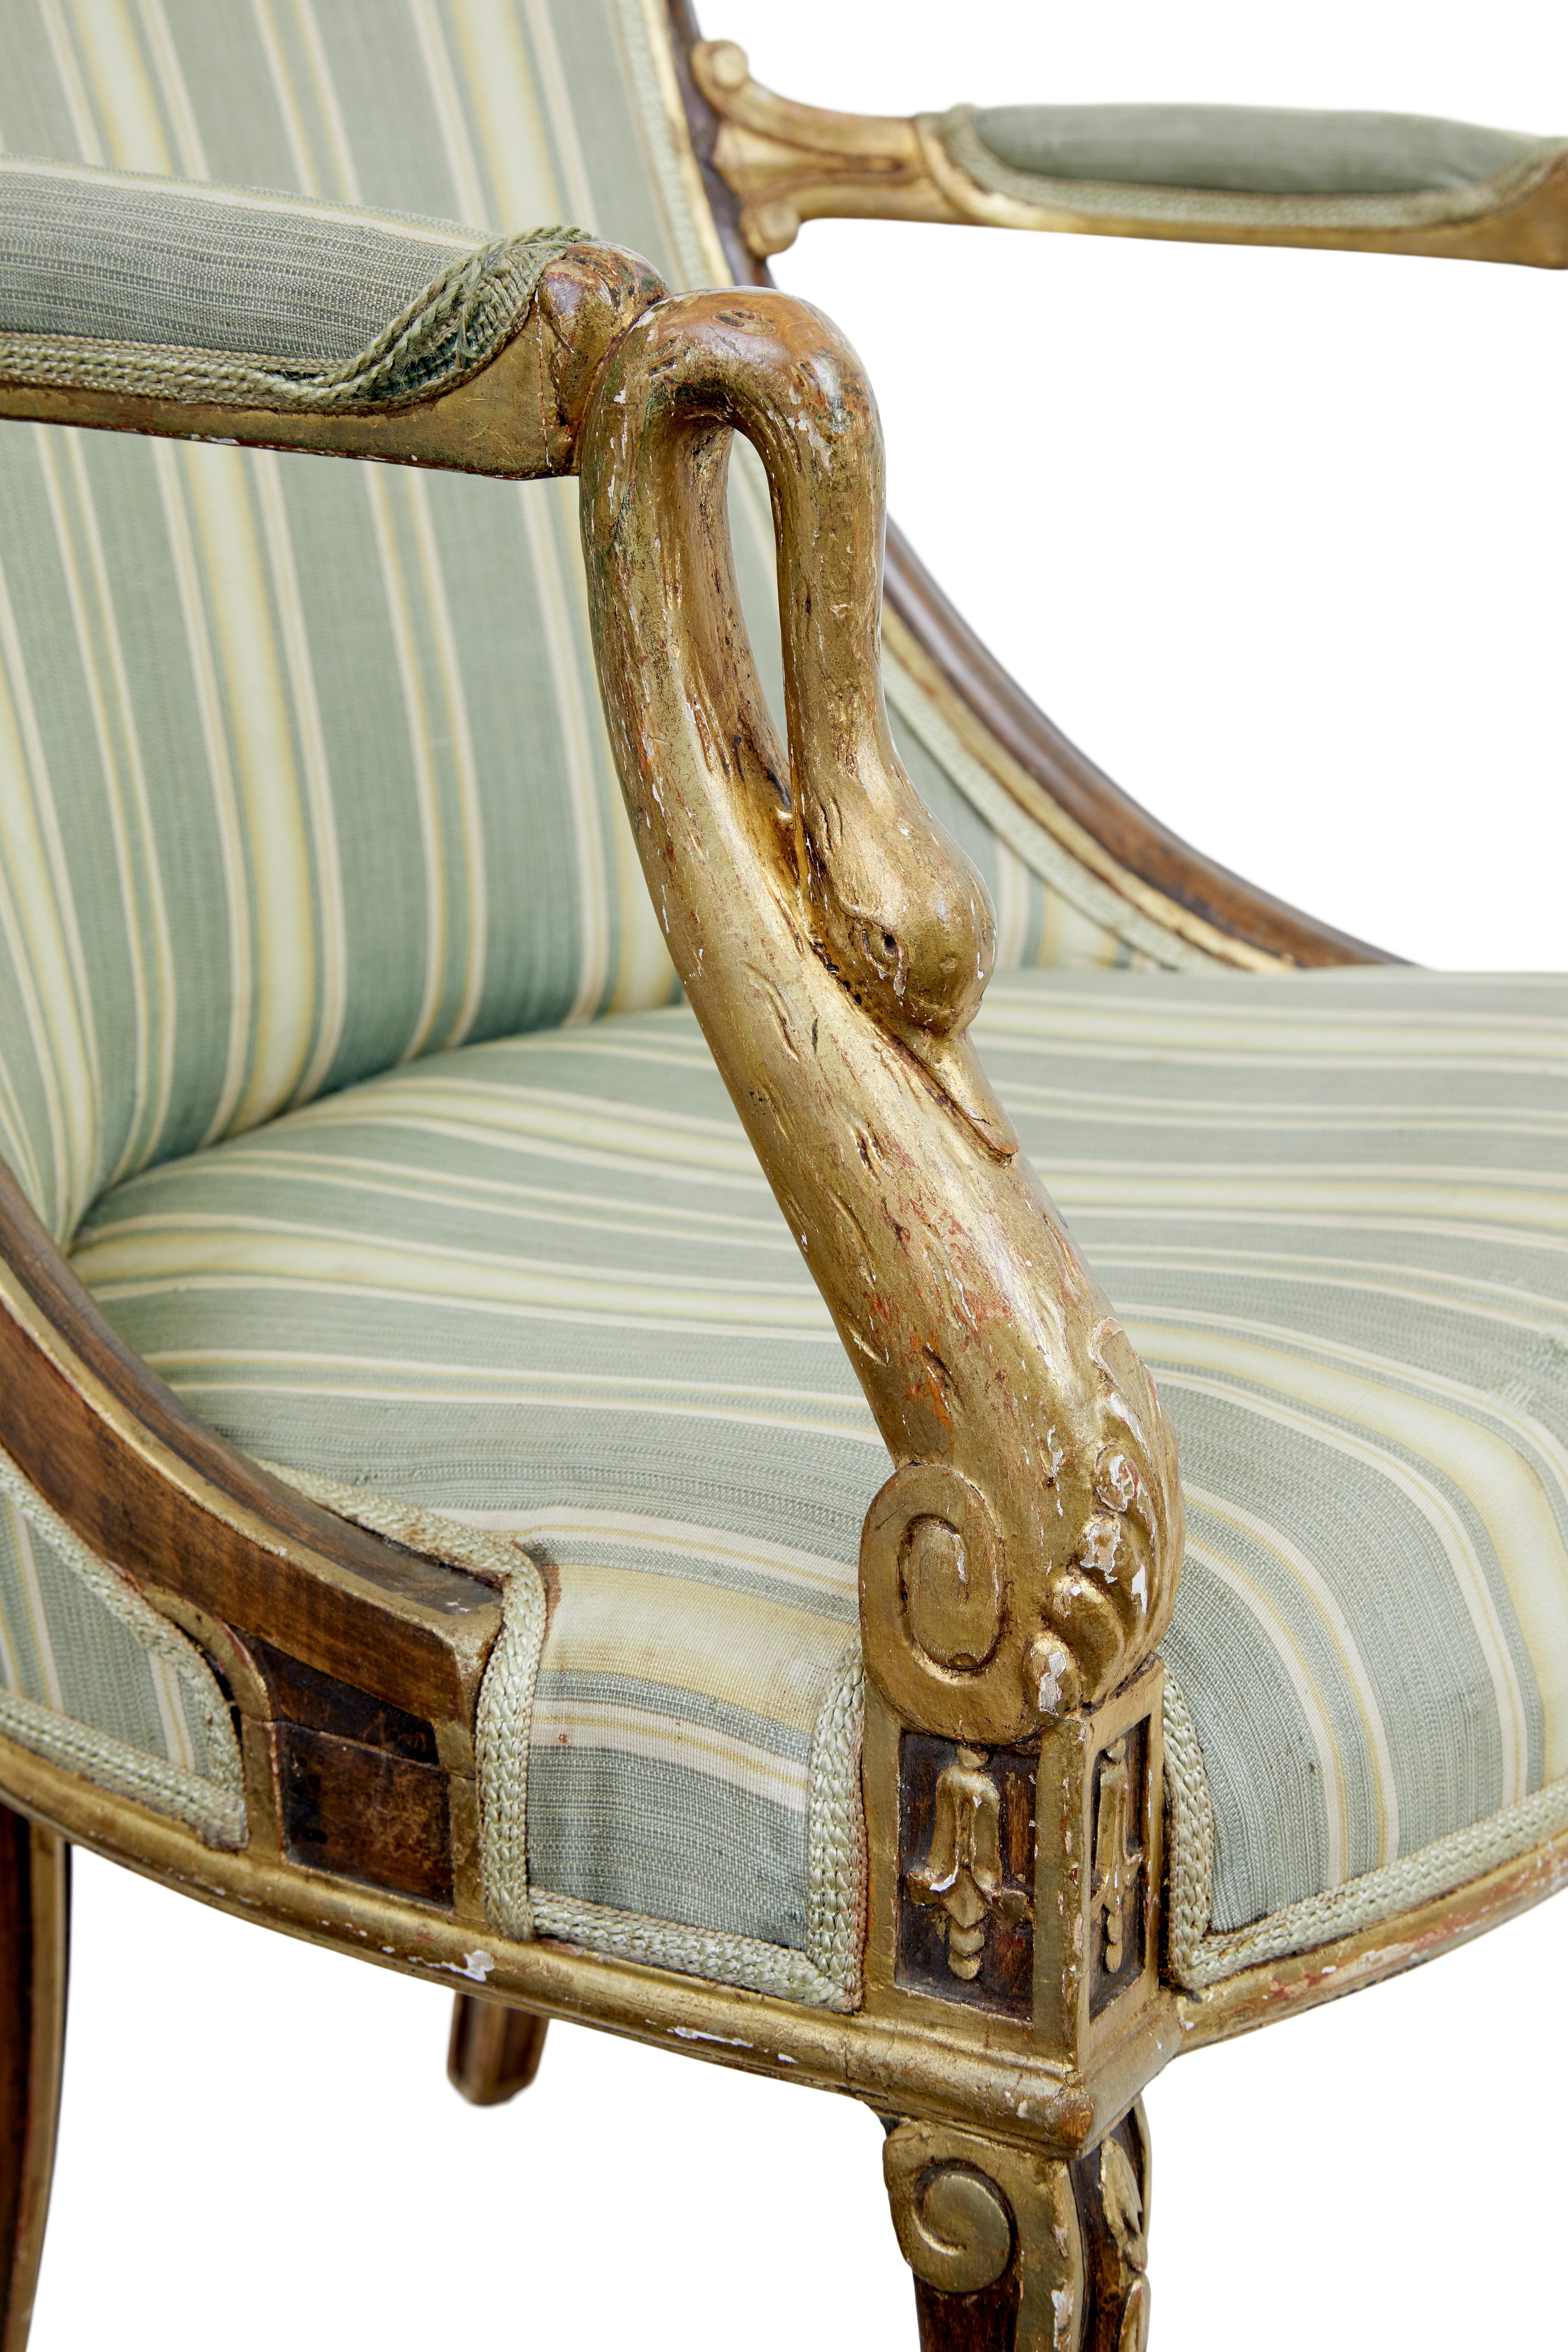 French Provincial Pair of mid 19th century French walnut and gilt armchairs